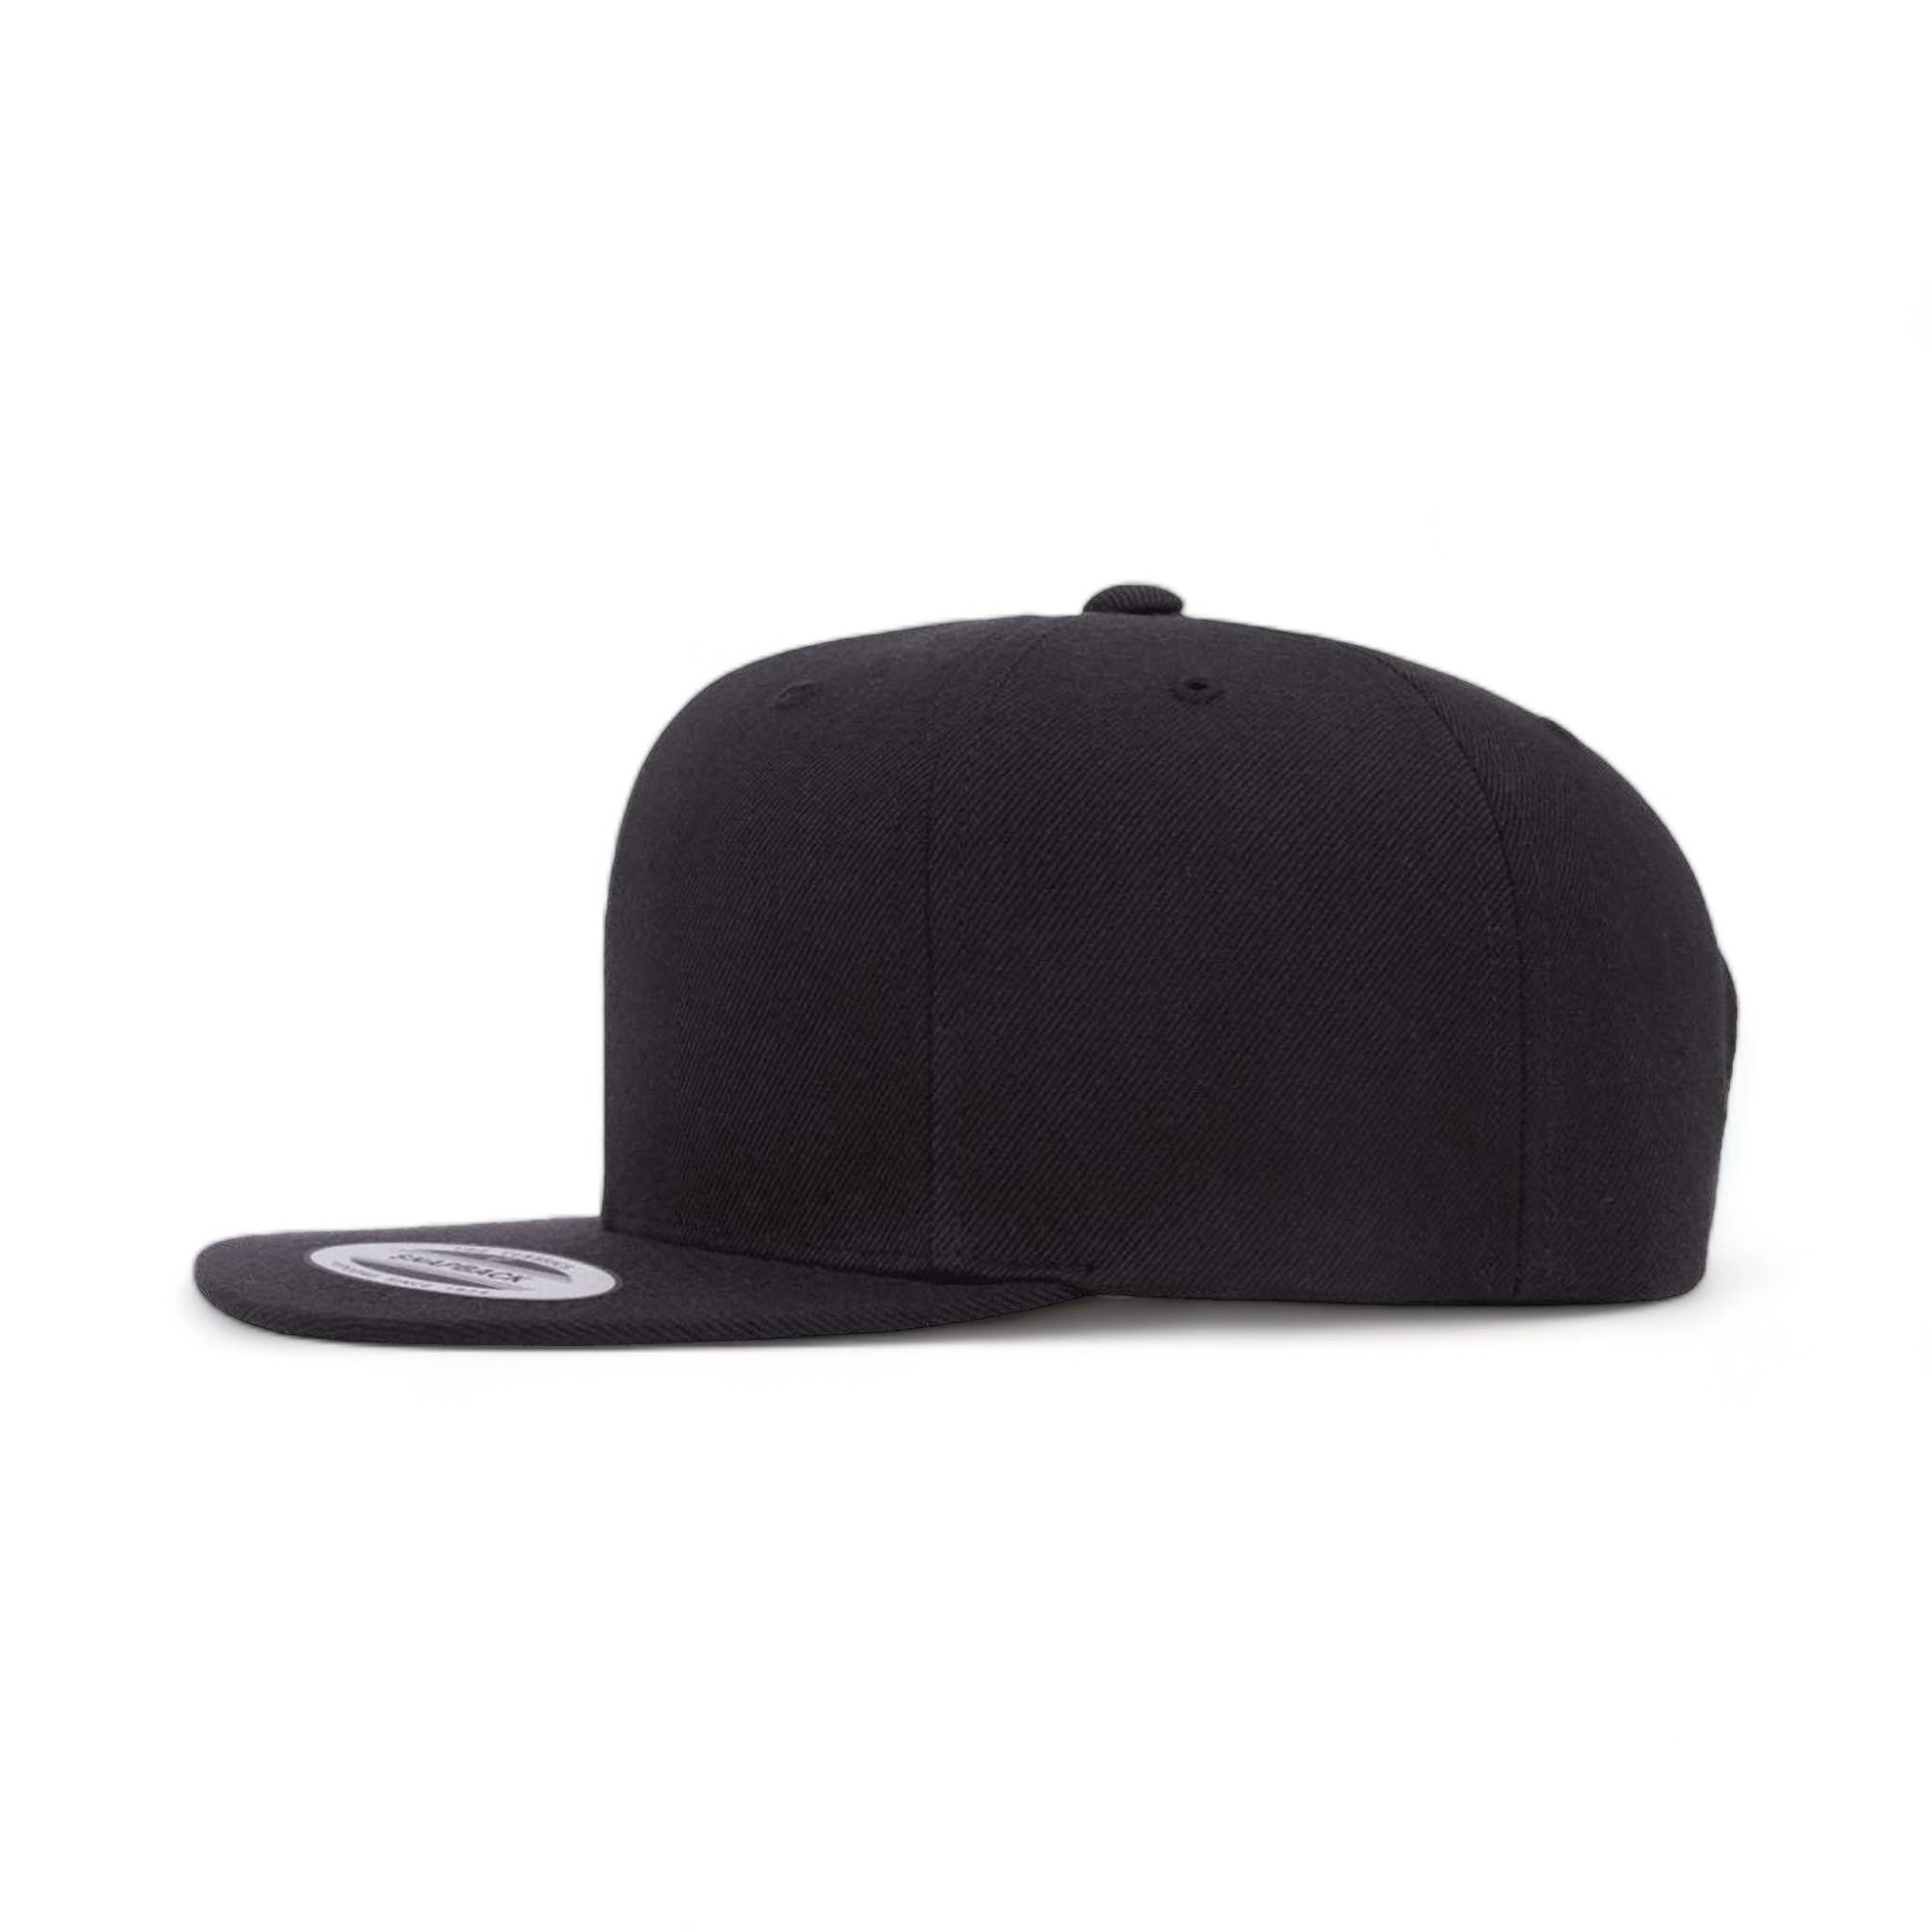 Side view of YP Classics 6089M custom hat in black